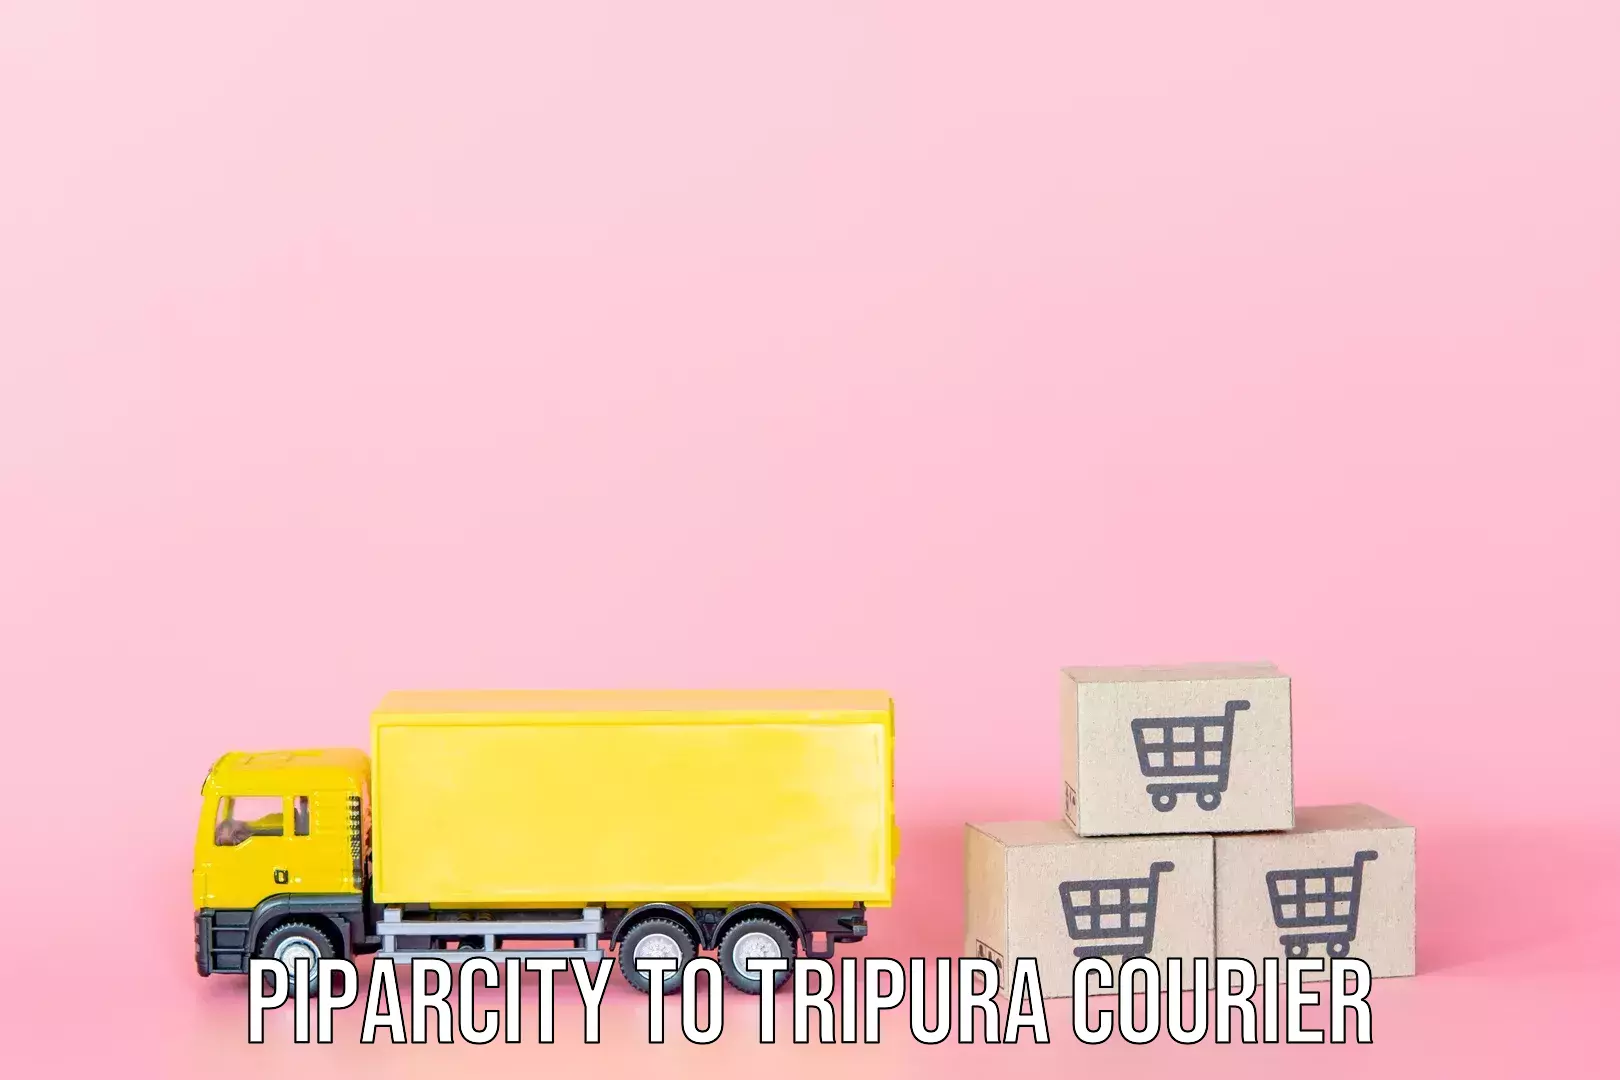 Efficient luggage delivery in Piparcity to Tripura